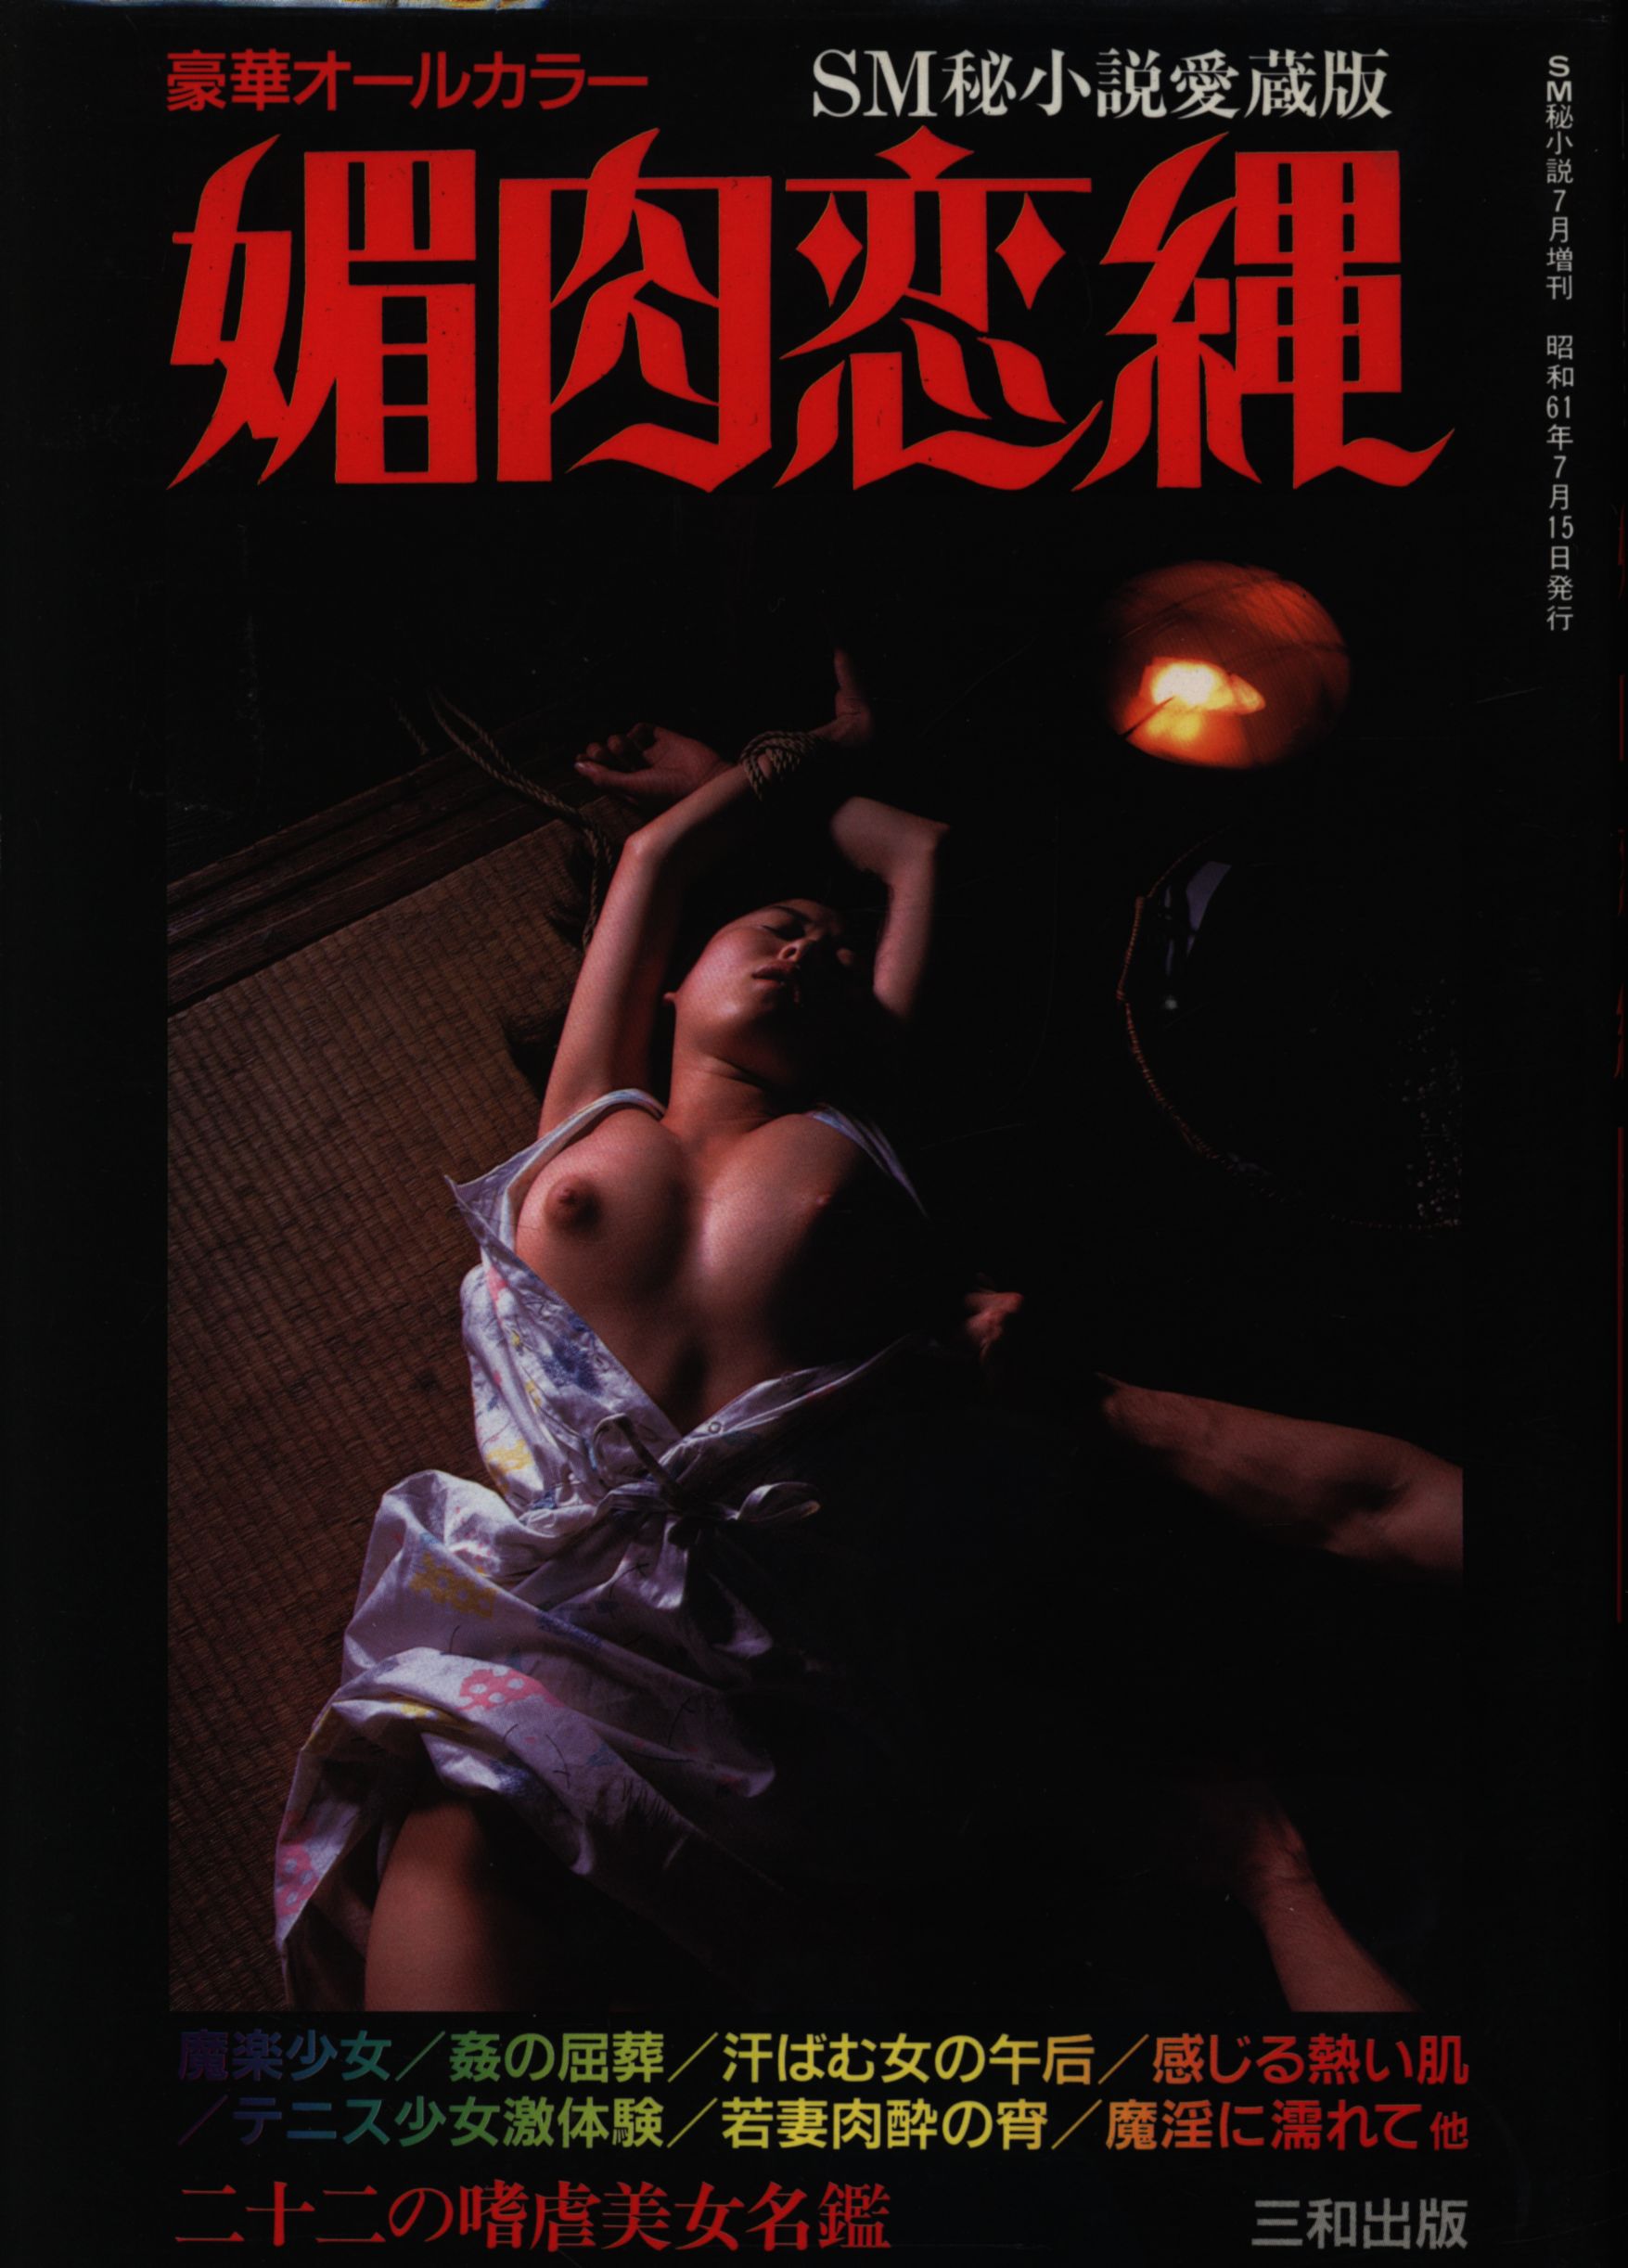 Sm秘小説緊縛写真260枚 Free Download Nude Photo Gallery